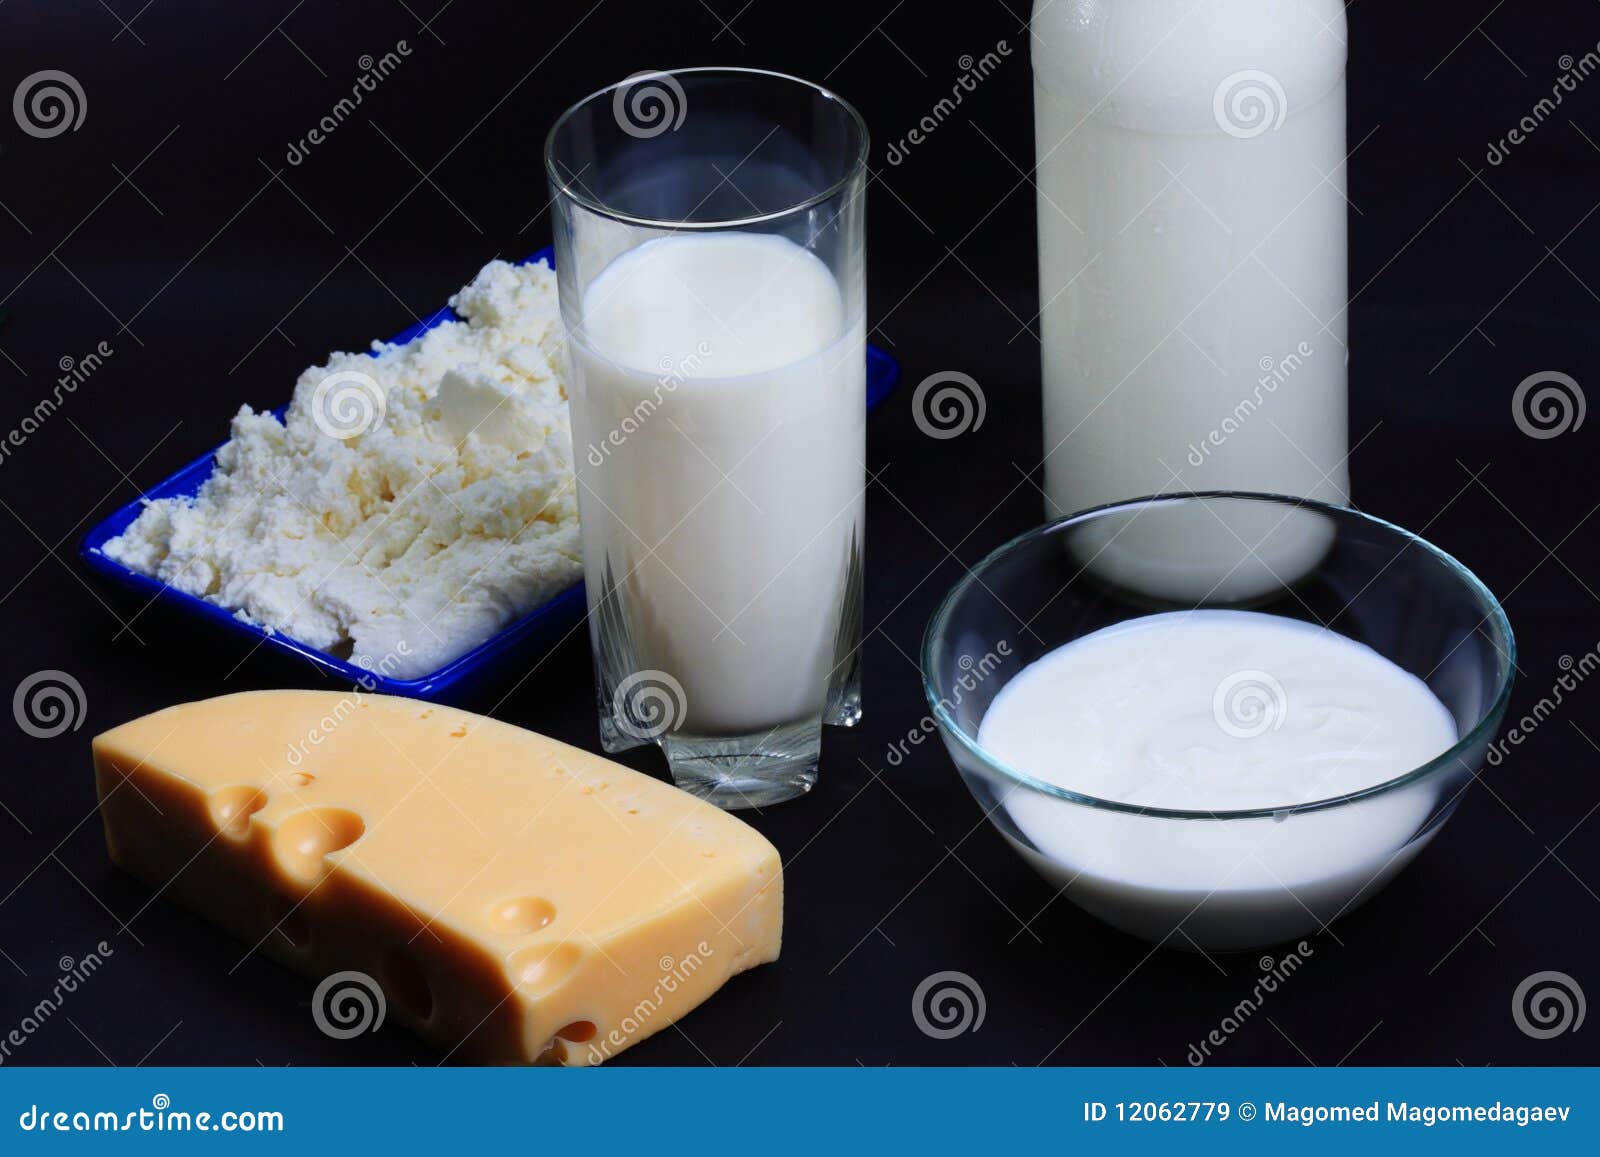 milk and derived products